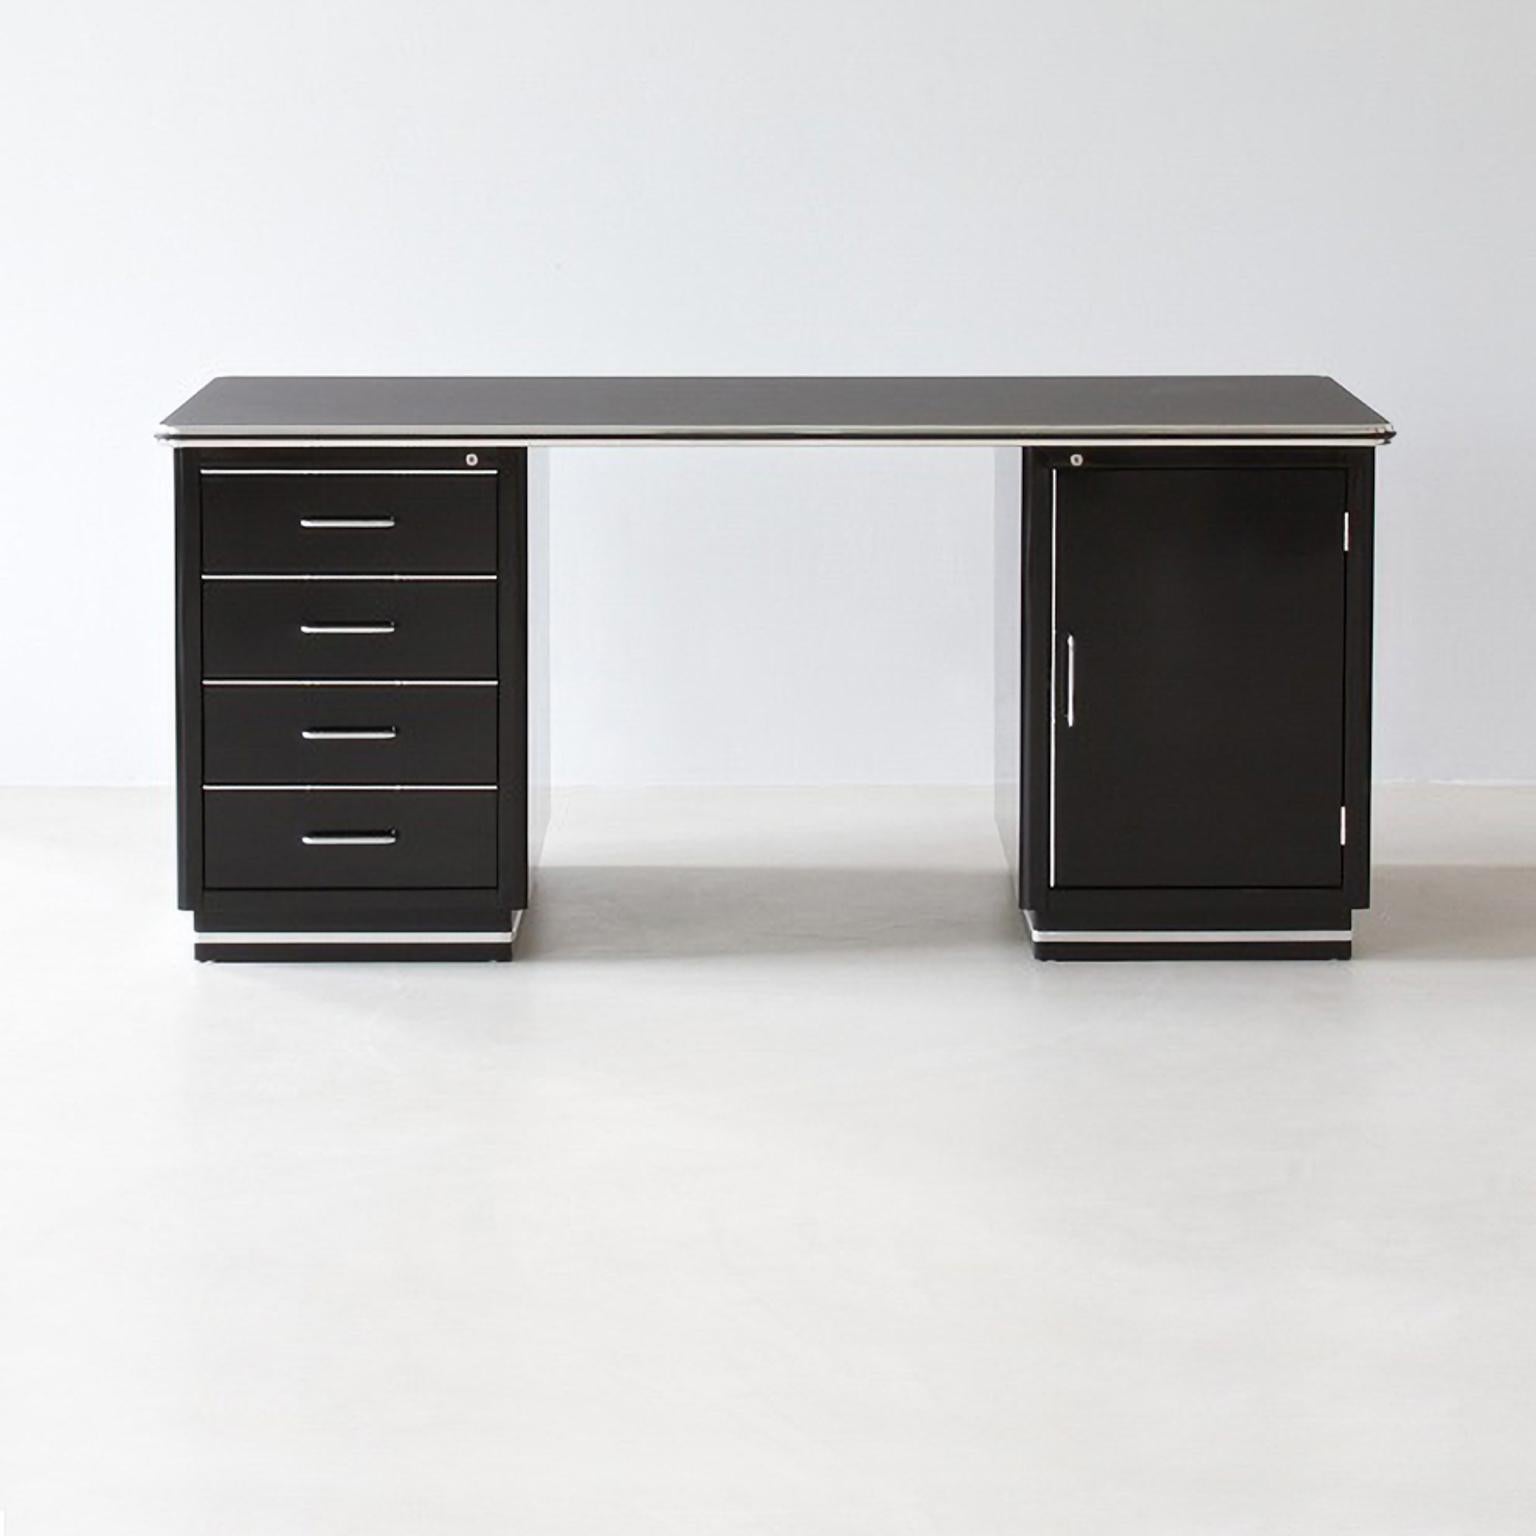 Contemporary Bespoke Executive Metal Desk, Lacquered Metal, Industrial Design, Germany, 2018 For Sale